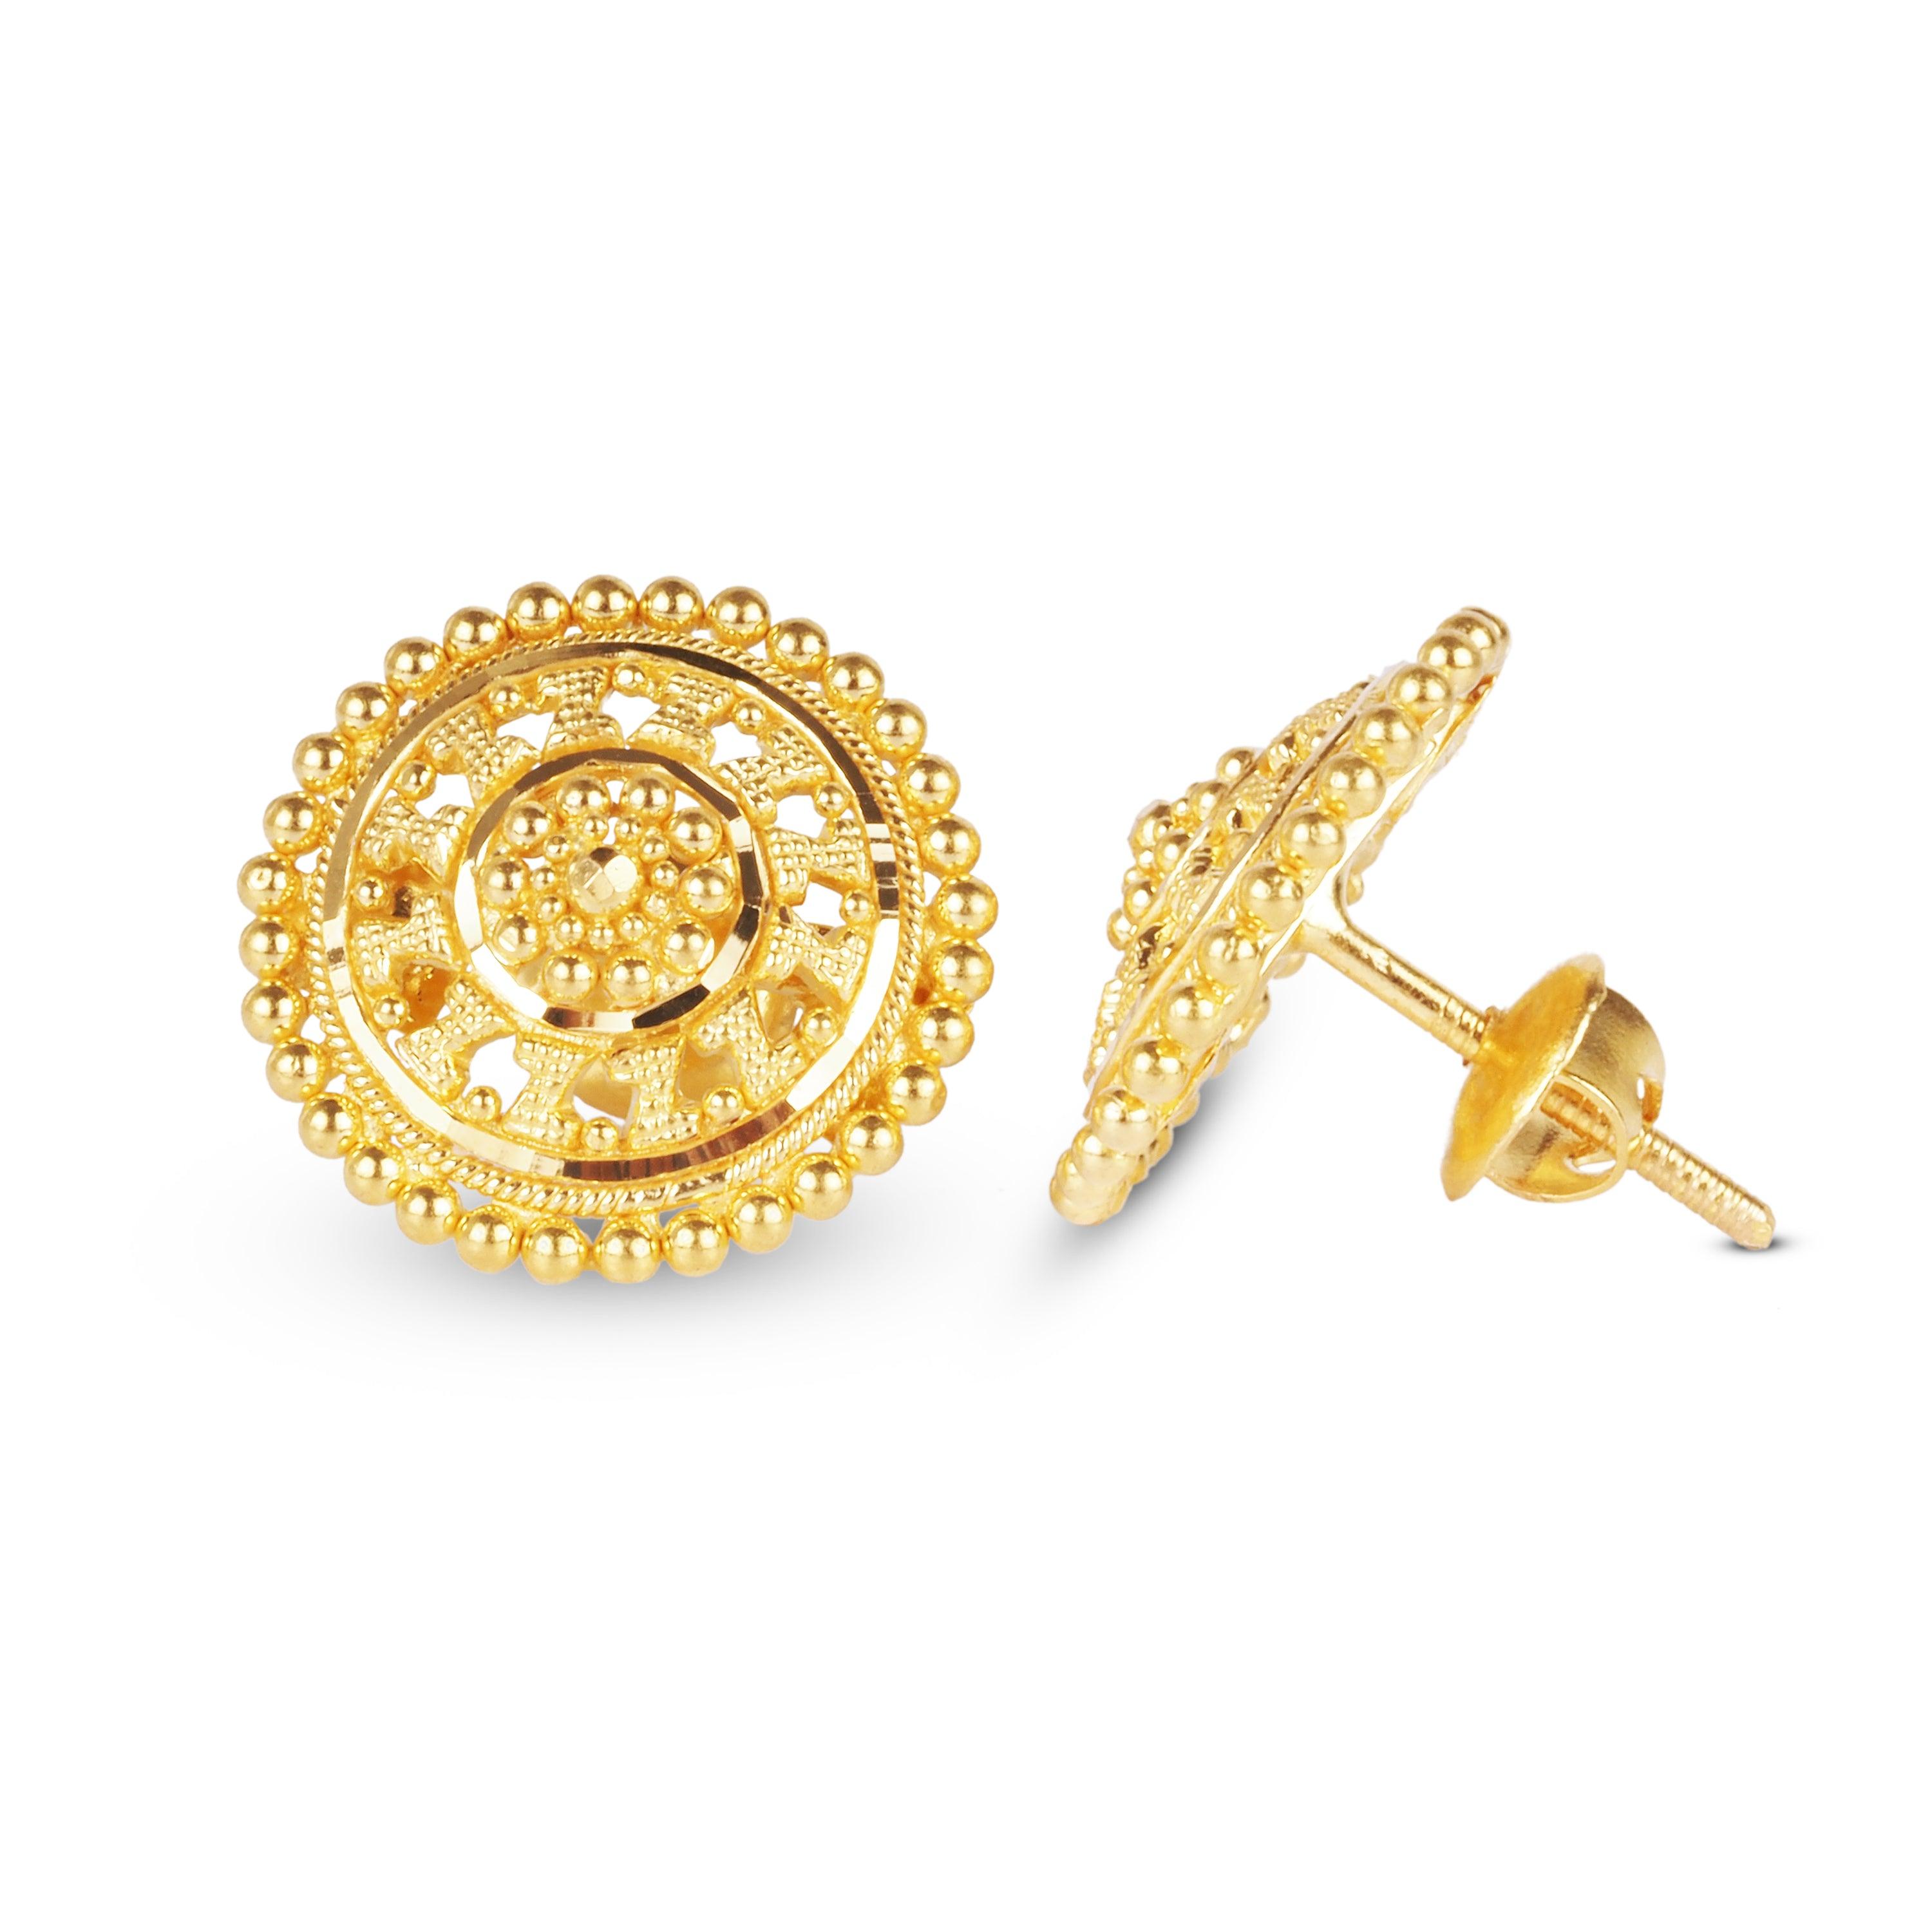 22ct Gold Earrings With Filigree Work Design E-7934 - Minar Jewellers